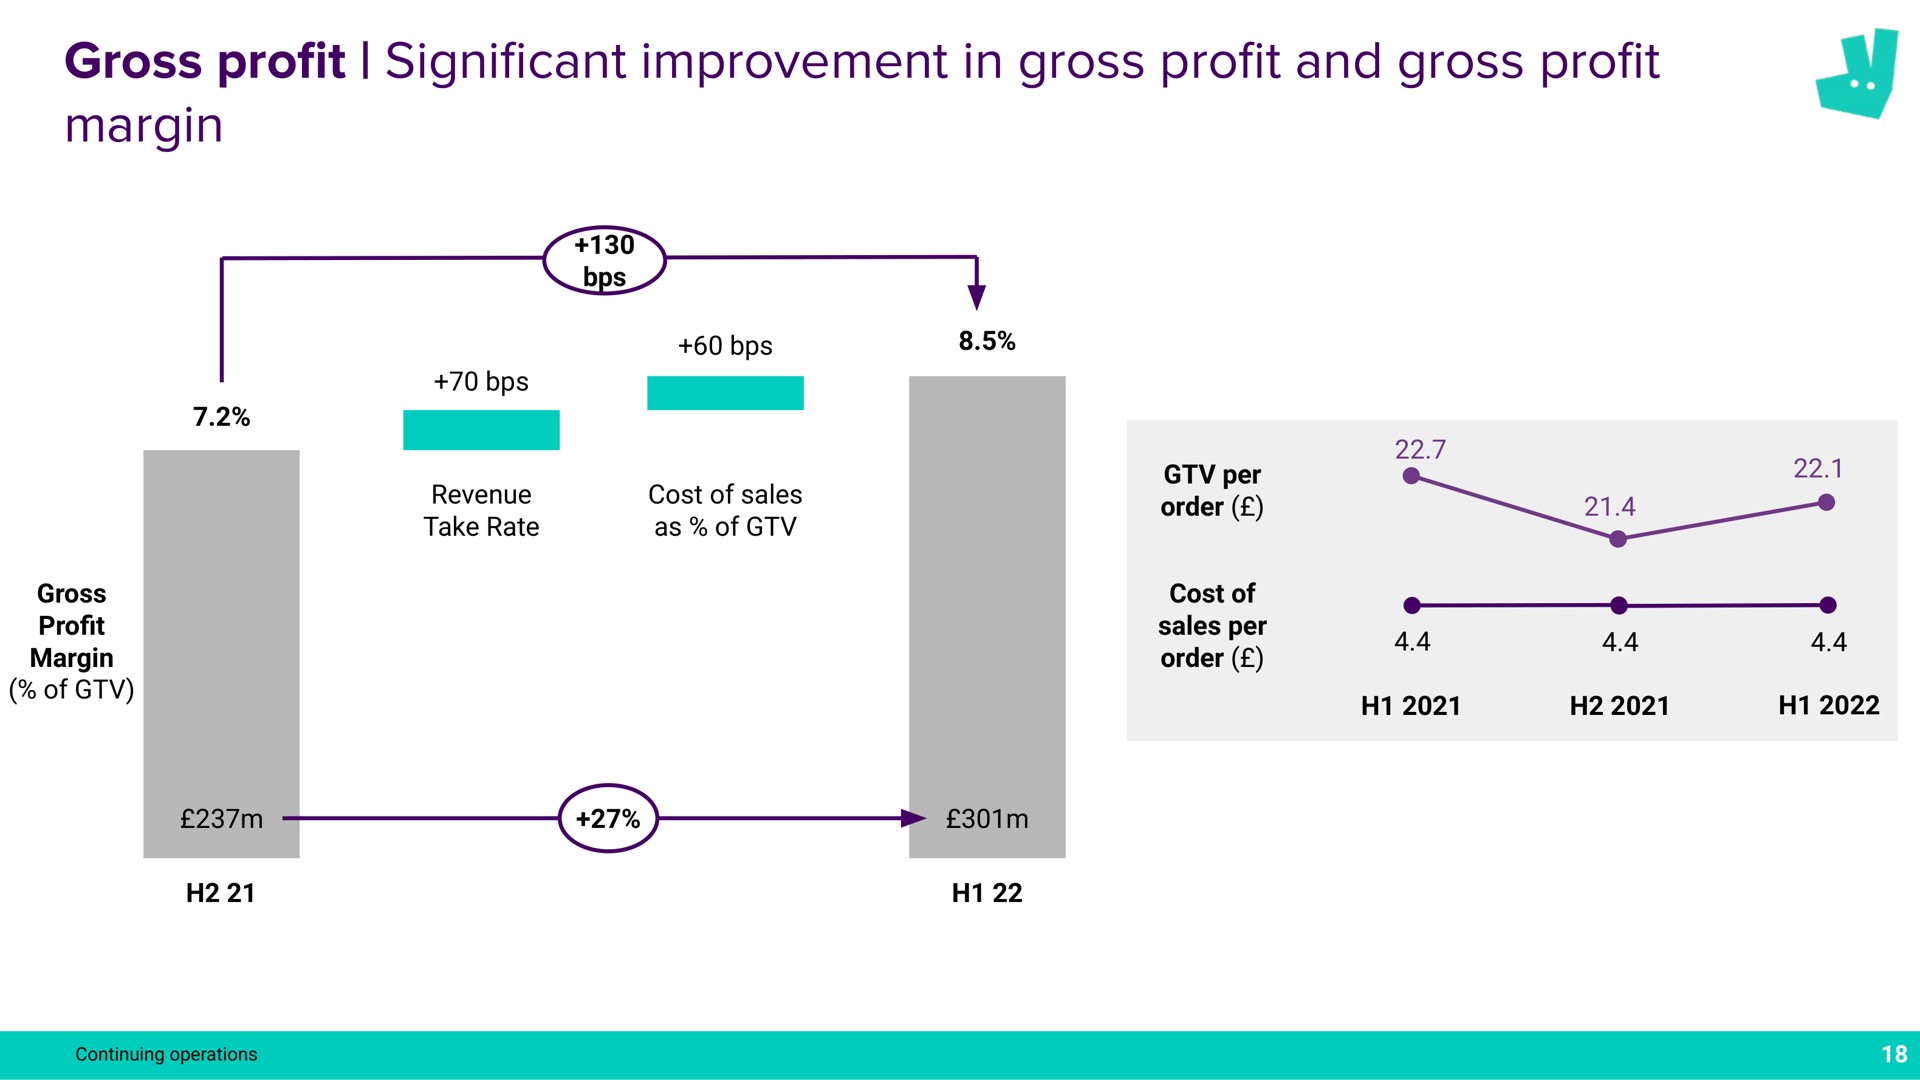 gross pro cant improvement in gross pro and gross pro margin profit significant profit profit a a | Deliveroo